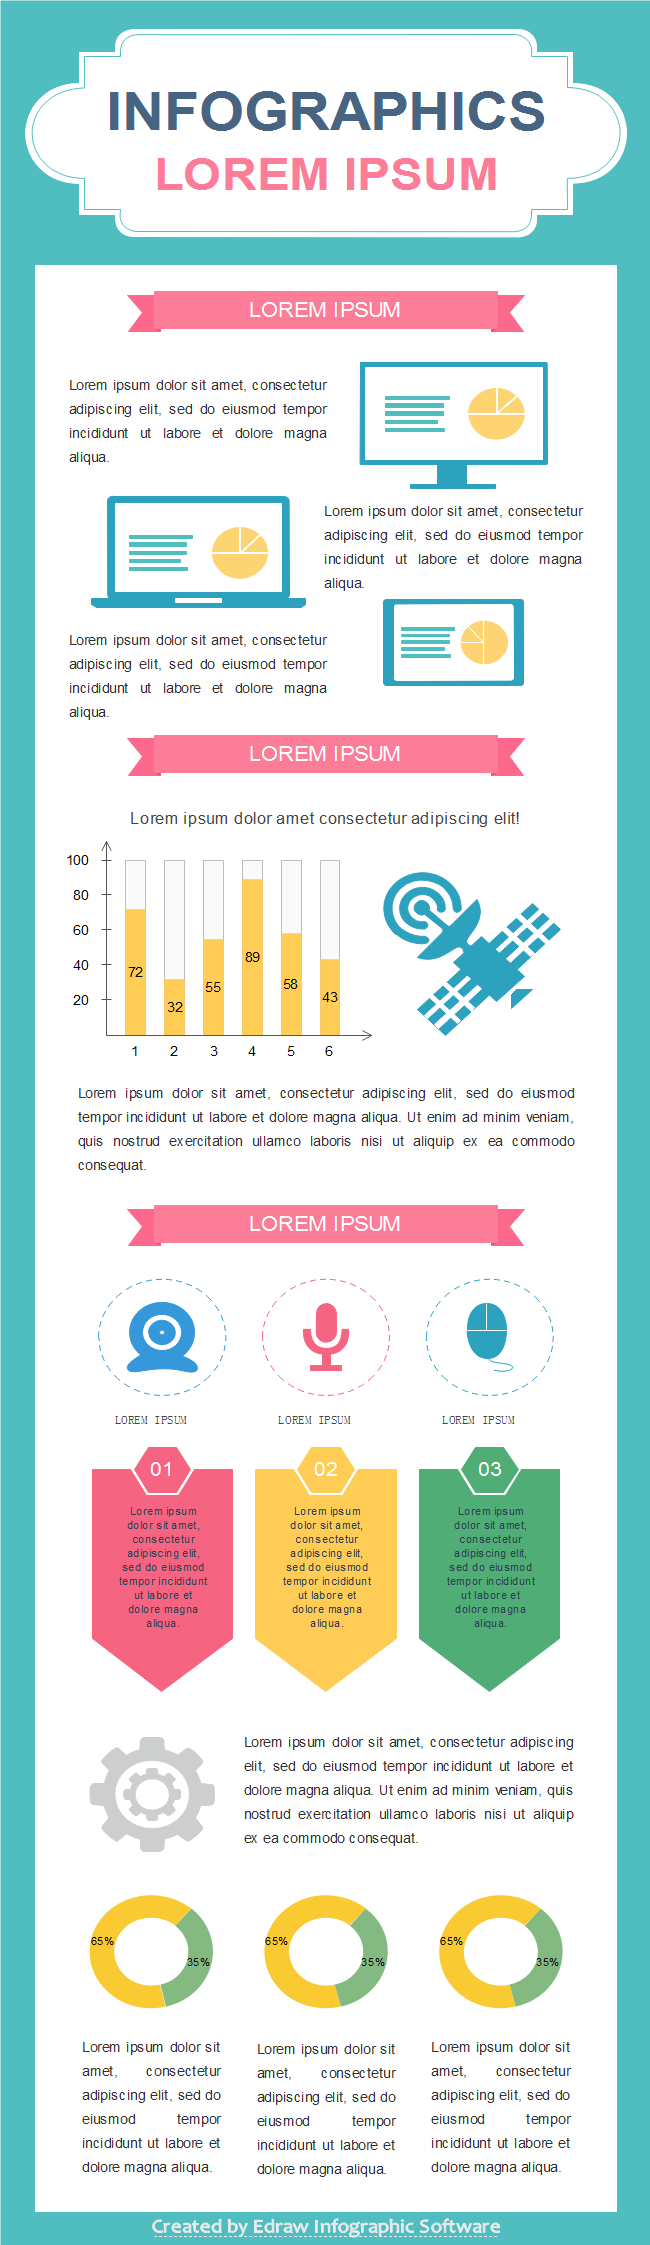 technology infographic template